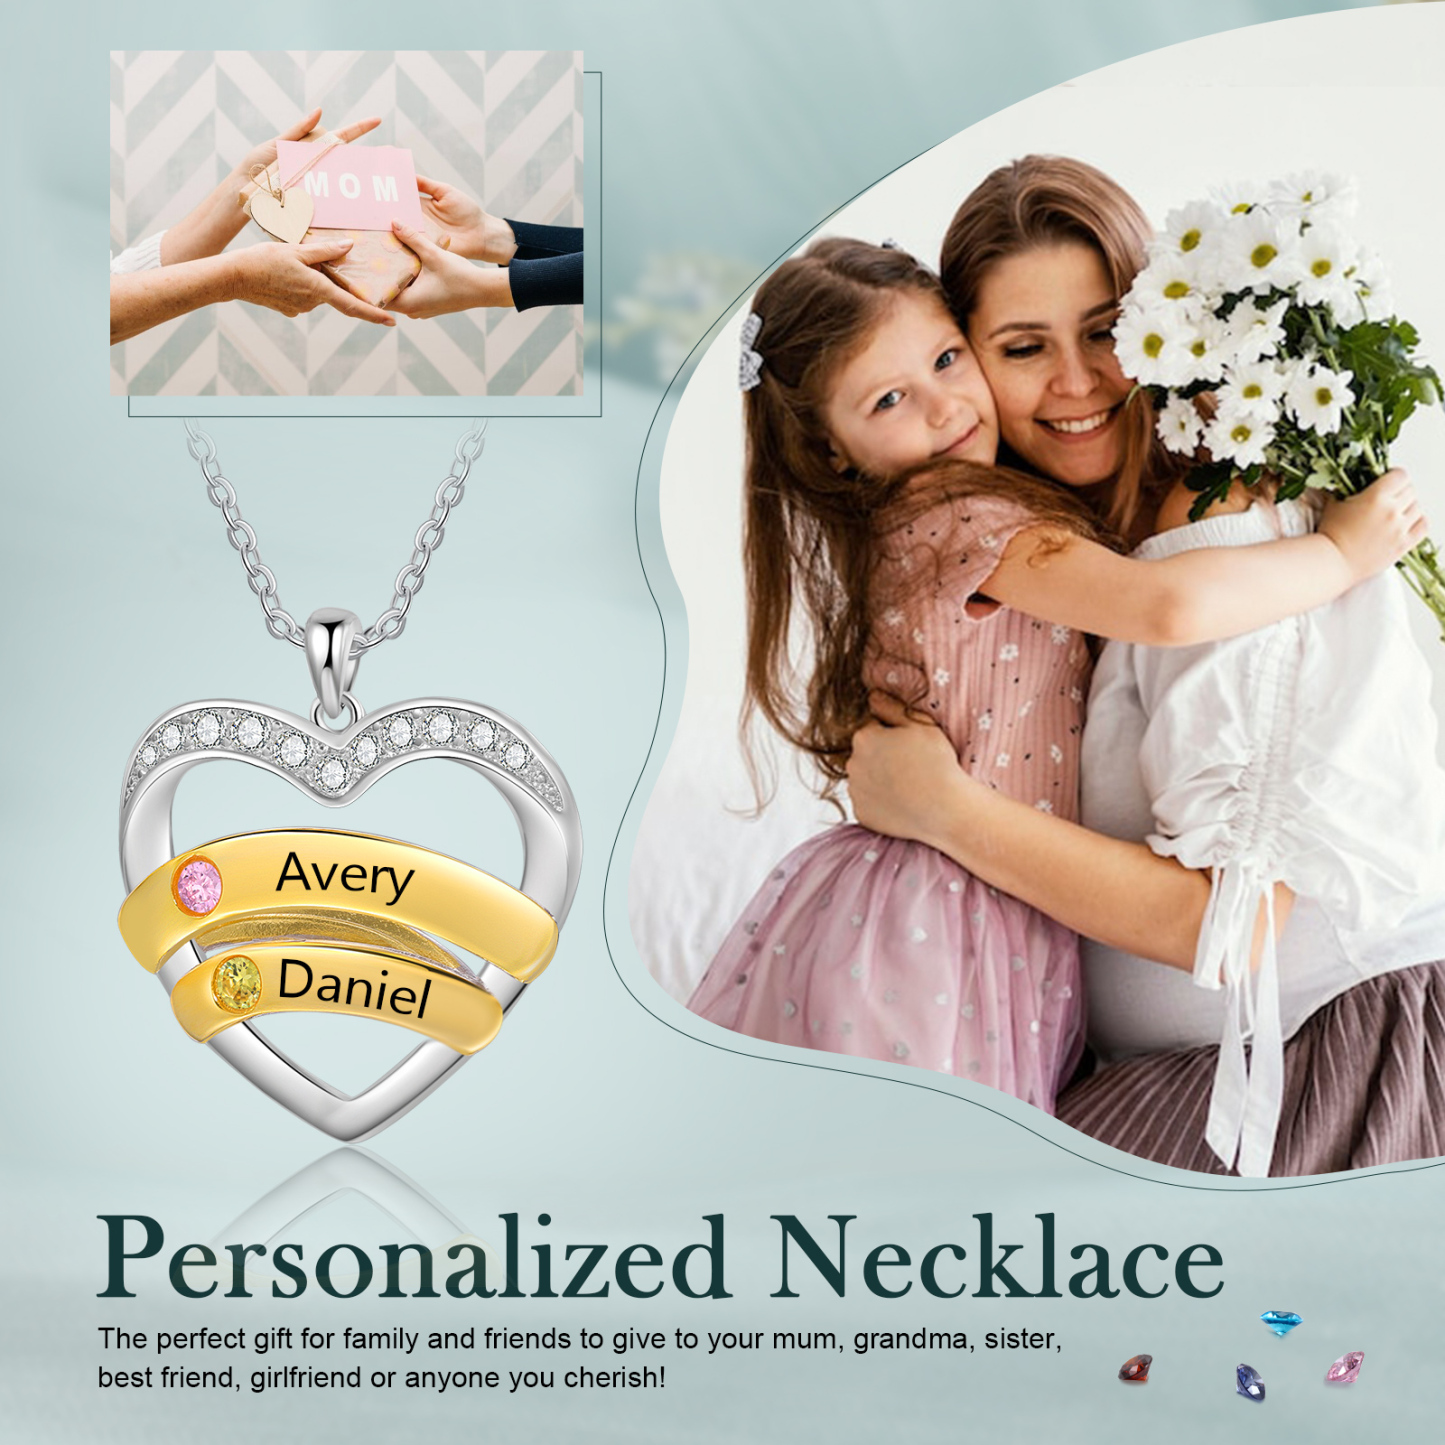 2 Names - Personalized Beautiful Heart Necklace with Custom Name and Birthstone, As a Mother's Day Gift for Mom